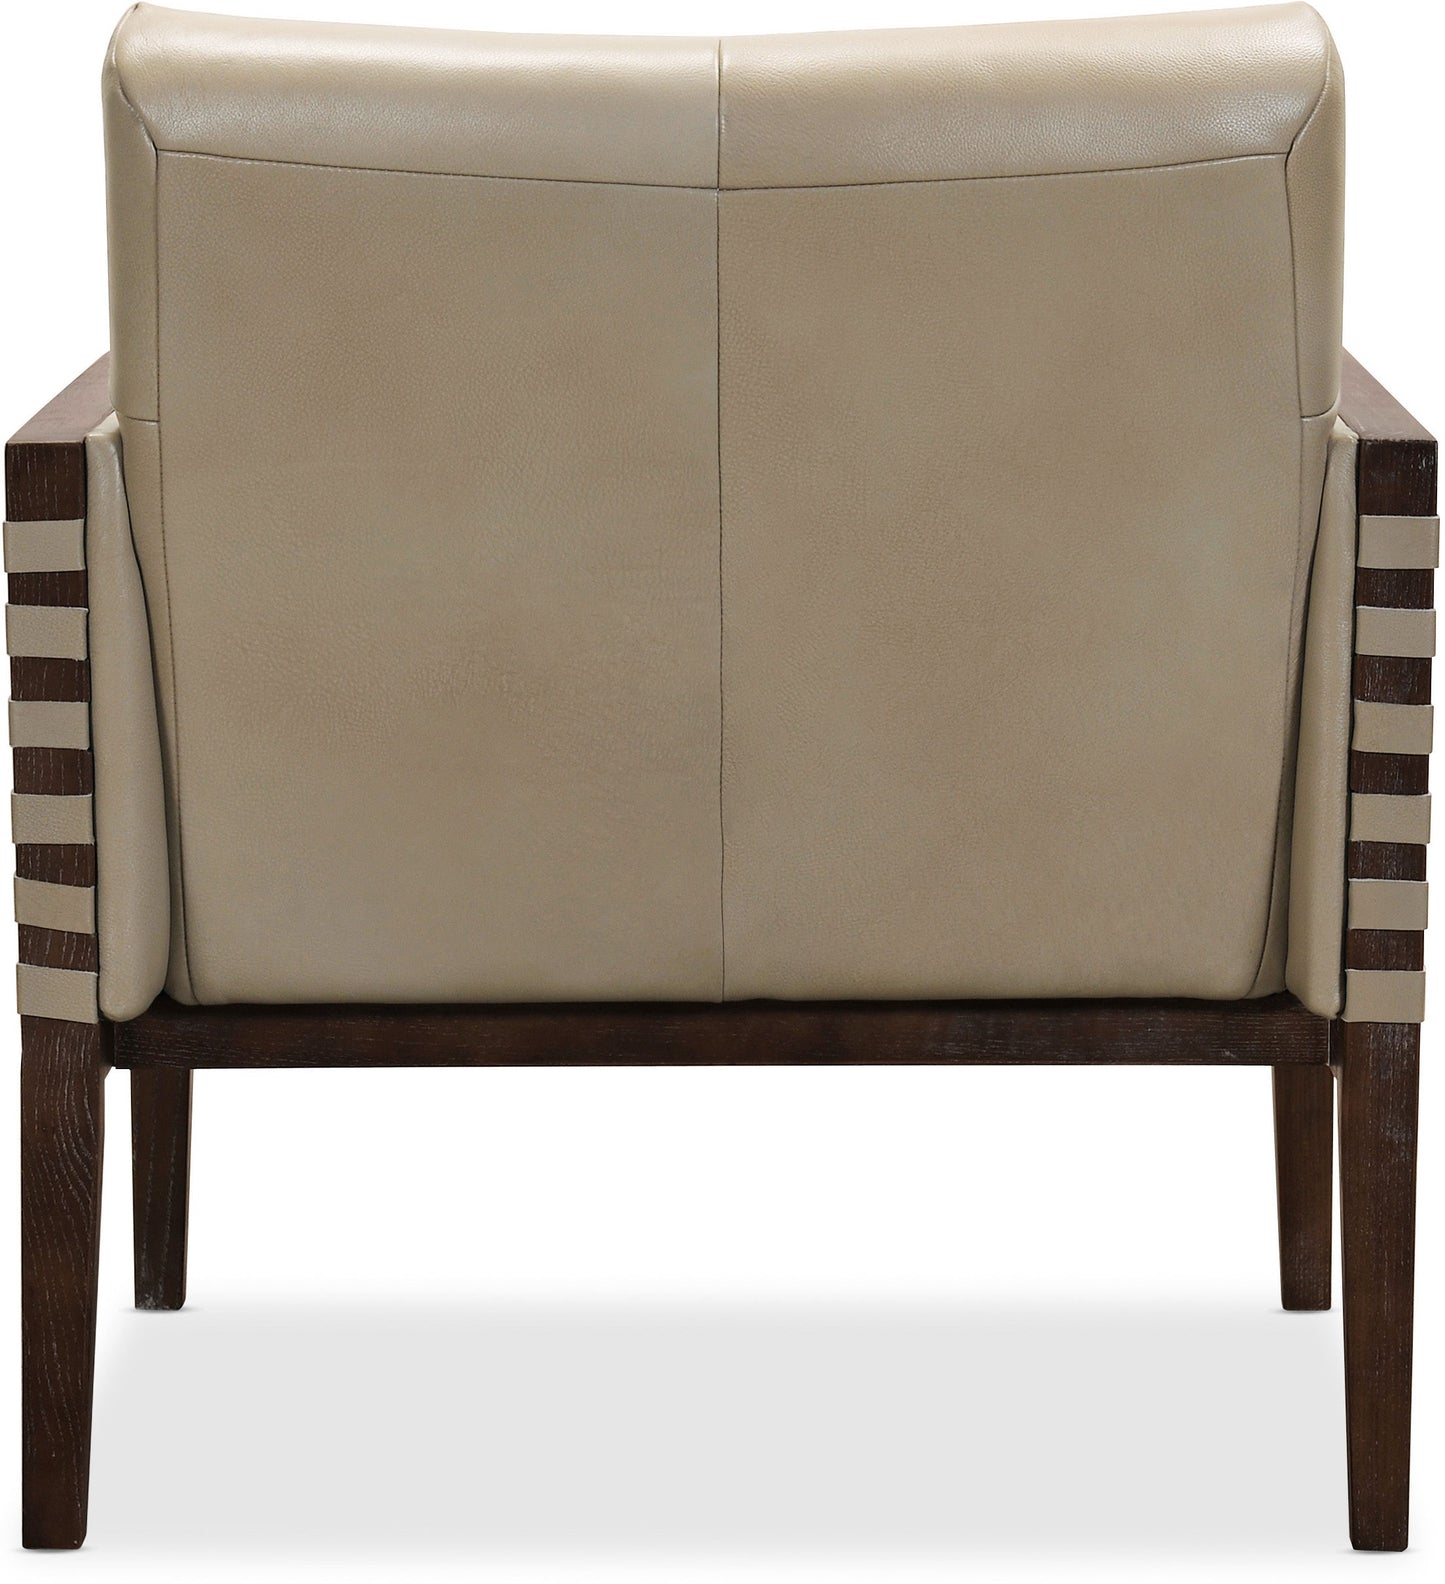 Hooker Furniture Living Room Carverdale Leather Club Chair w/Wood Frame - Dreamart Gallery